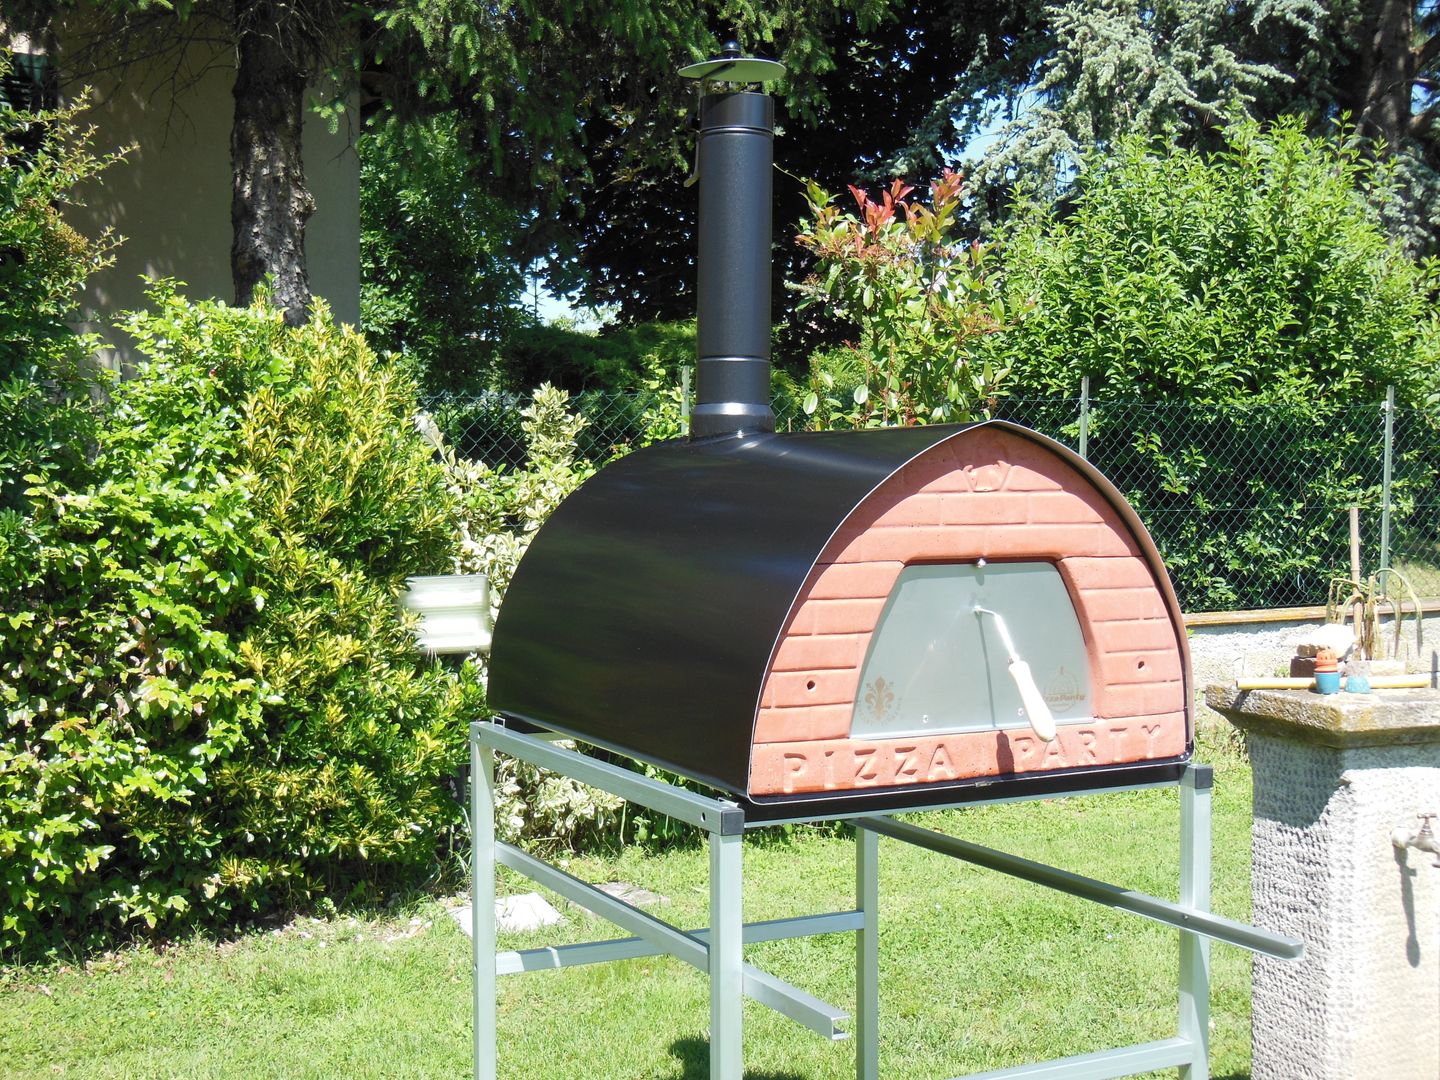 Wood fired pizza oven Pizzone by Pizza Party Genotema SRL Unipersonale Jardines rústicos Parrillas